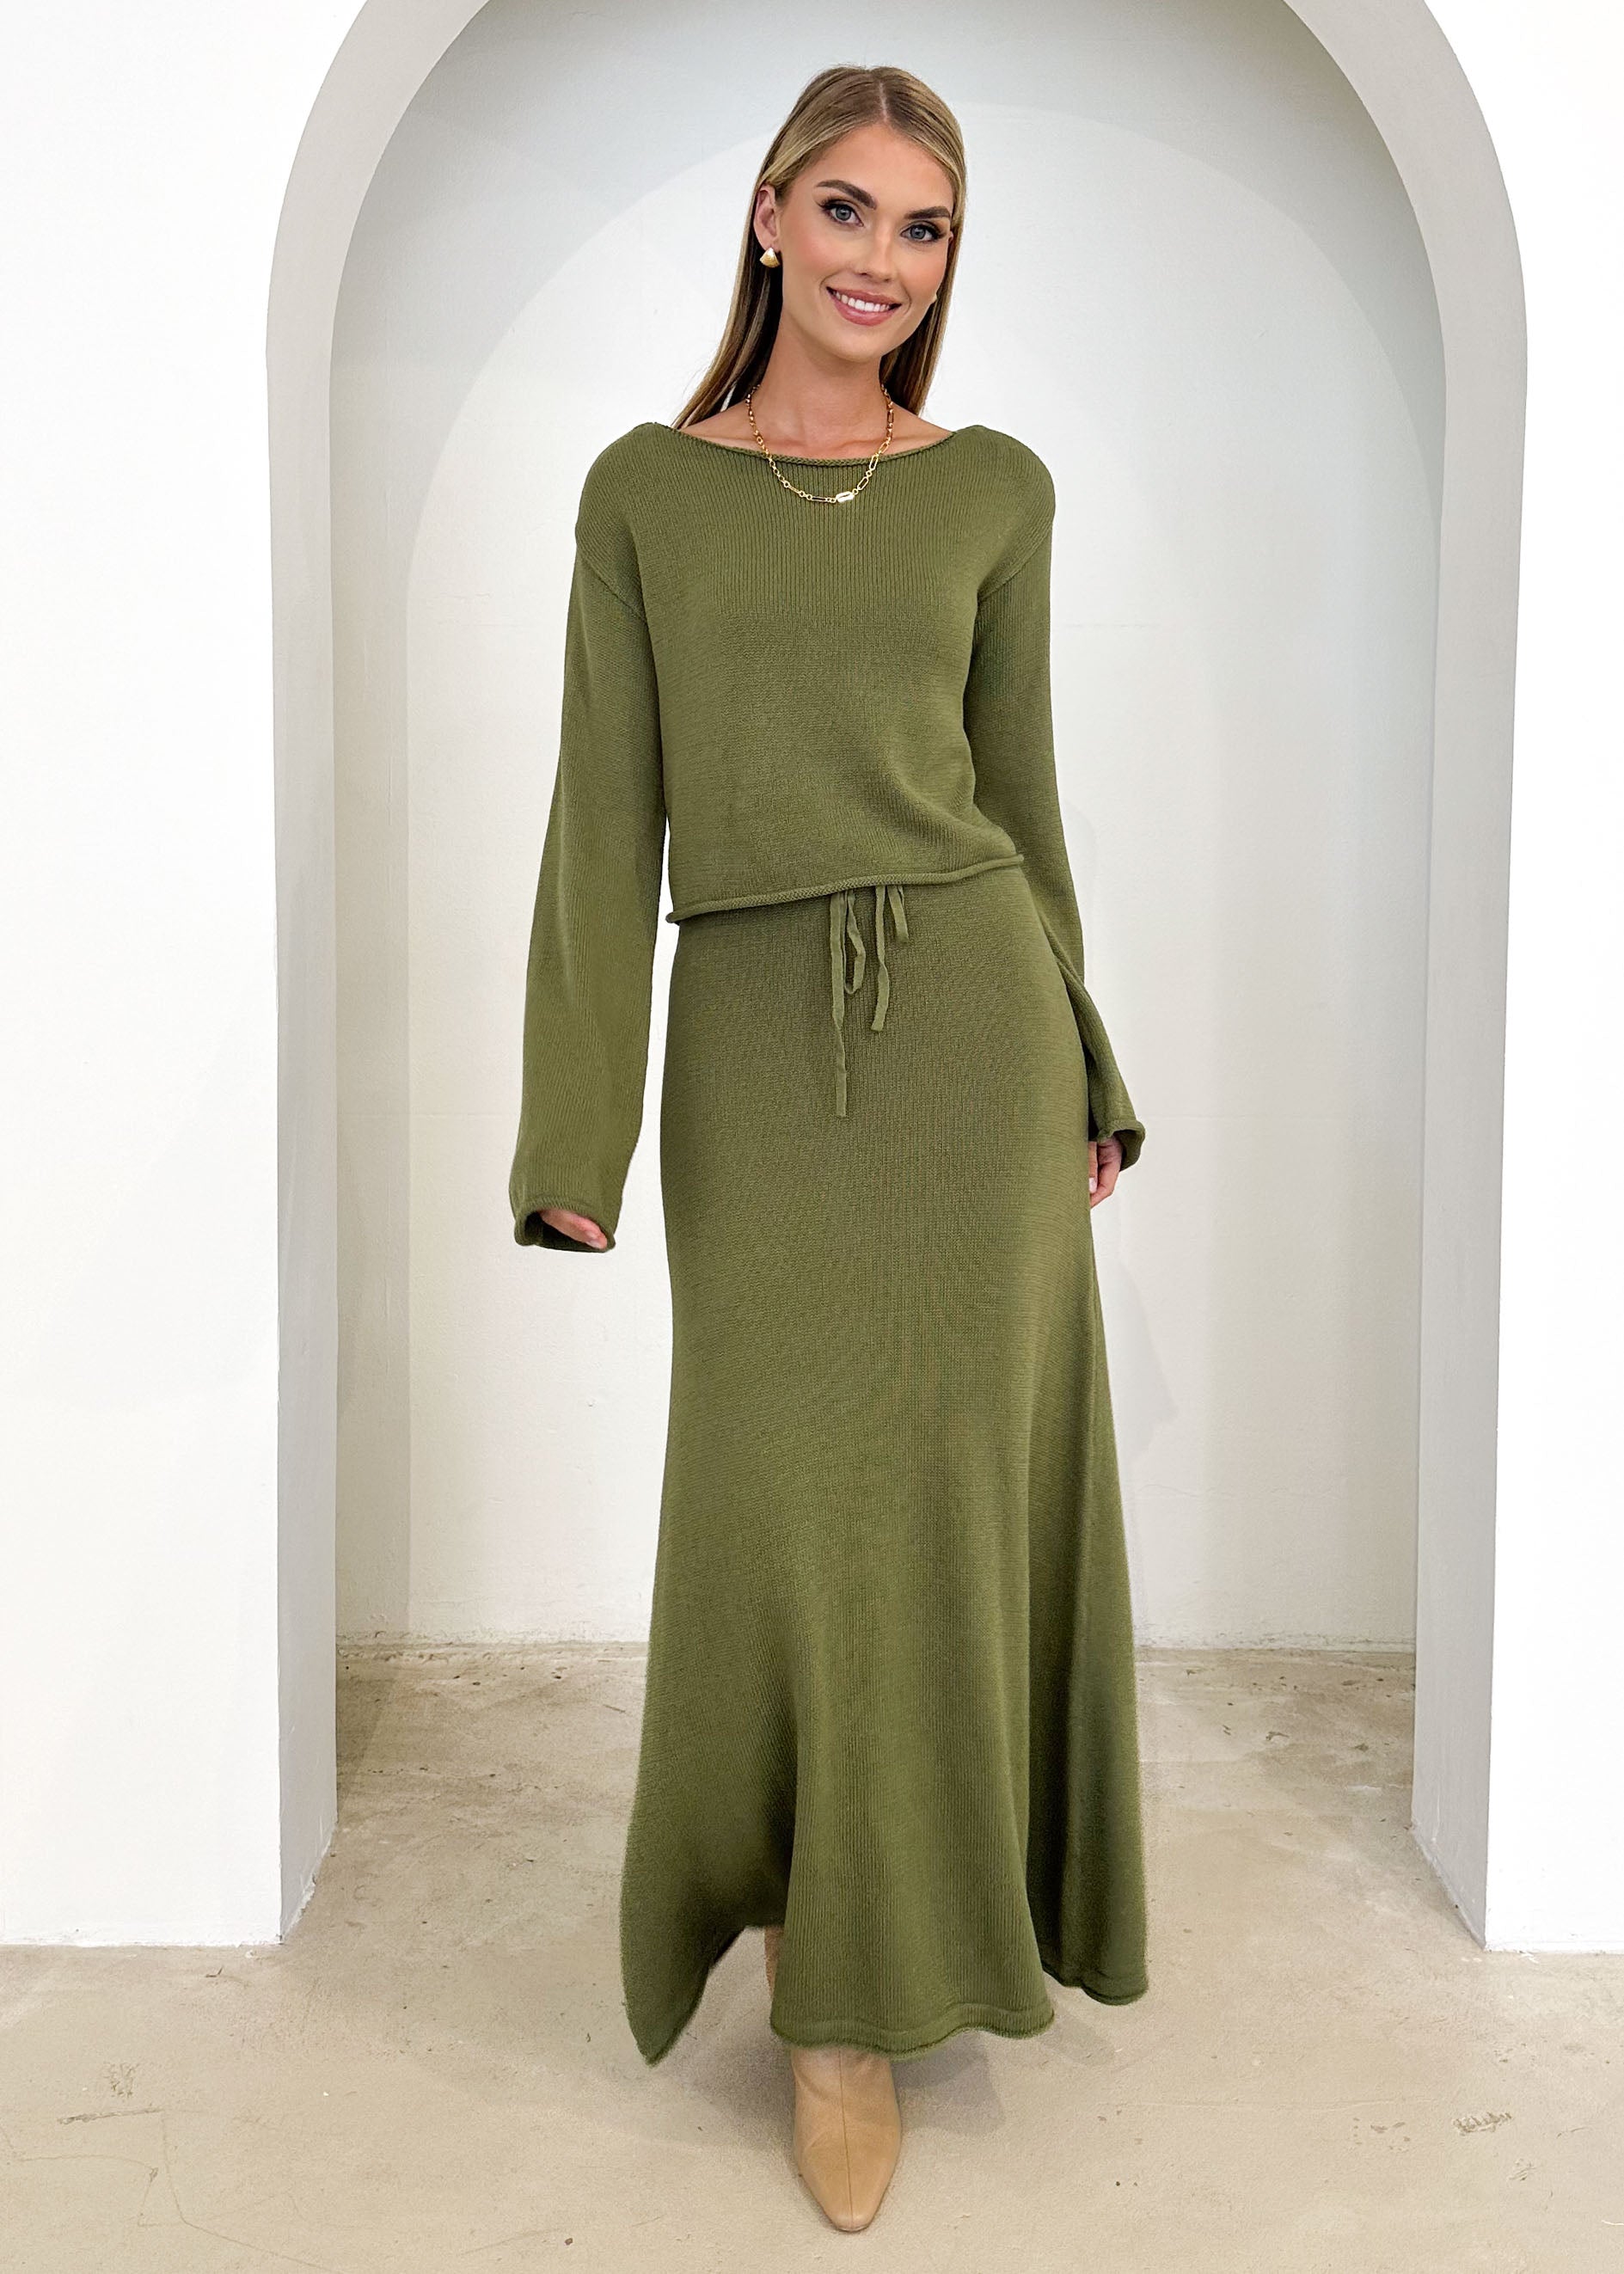 Emerson Knit Maxi Skirt - Olive